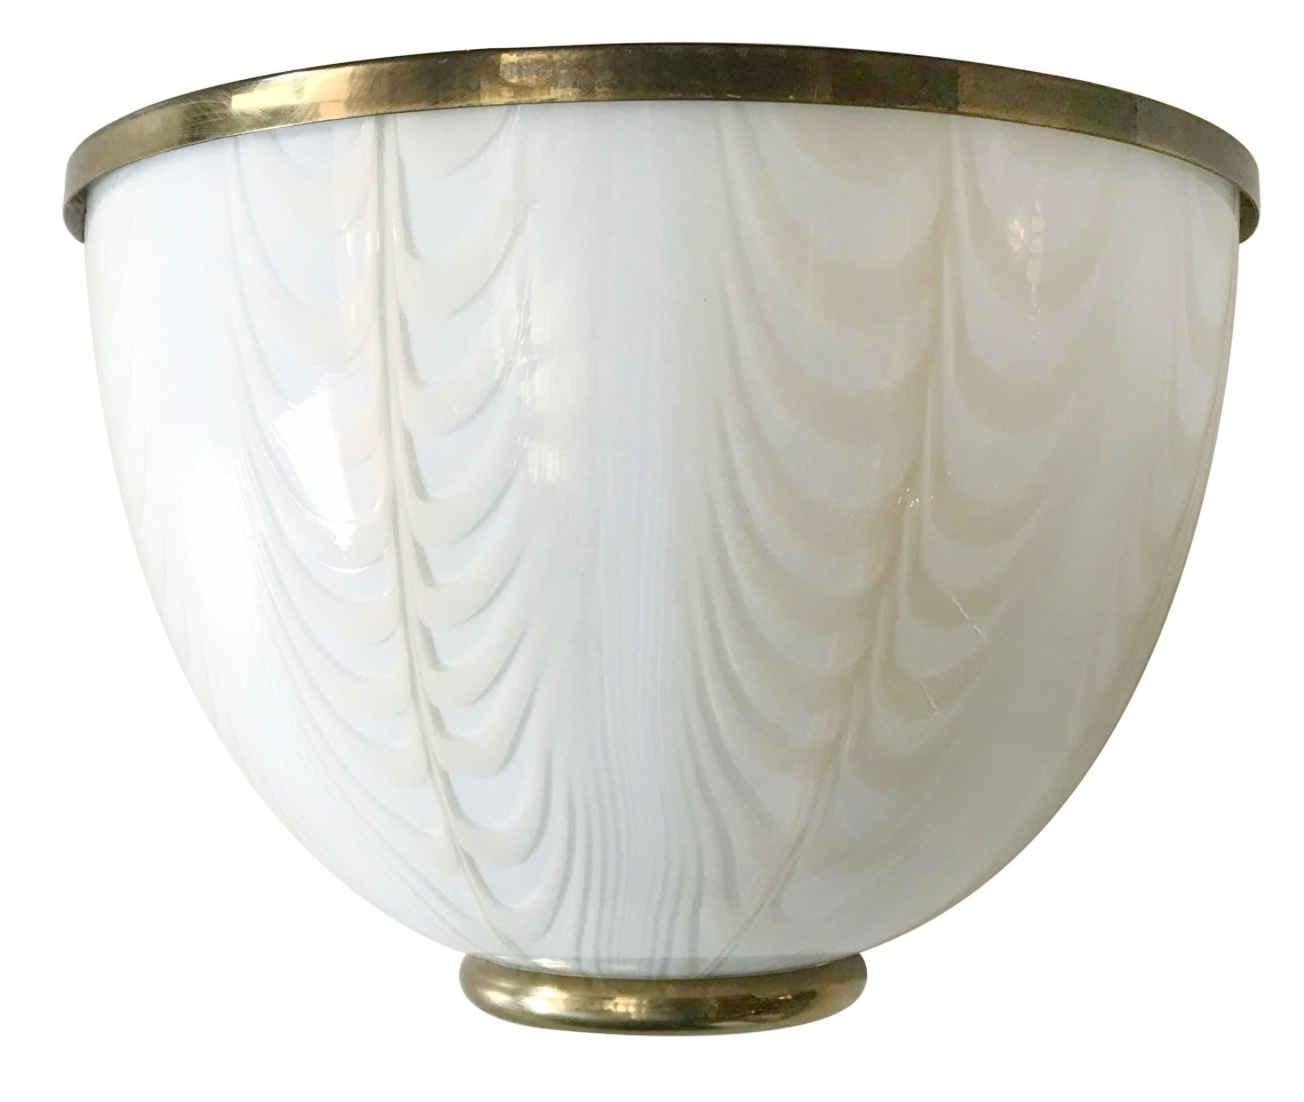 Vintage wall light with cream colored Murano glass decorated with amber feather-shaped details on brass frame and painted metal back plate, by F. Fabbian for Mazzega / Made in Italy in the 1970s
2 lights / E12 or E14 type / max 40W each
Measures: